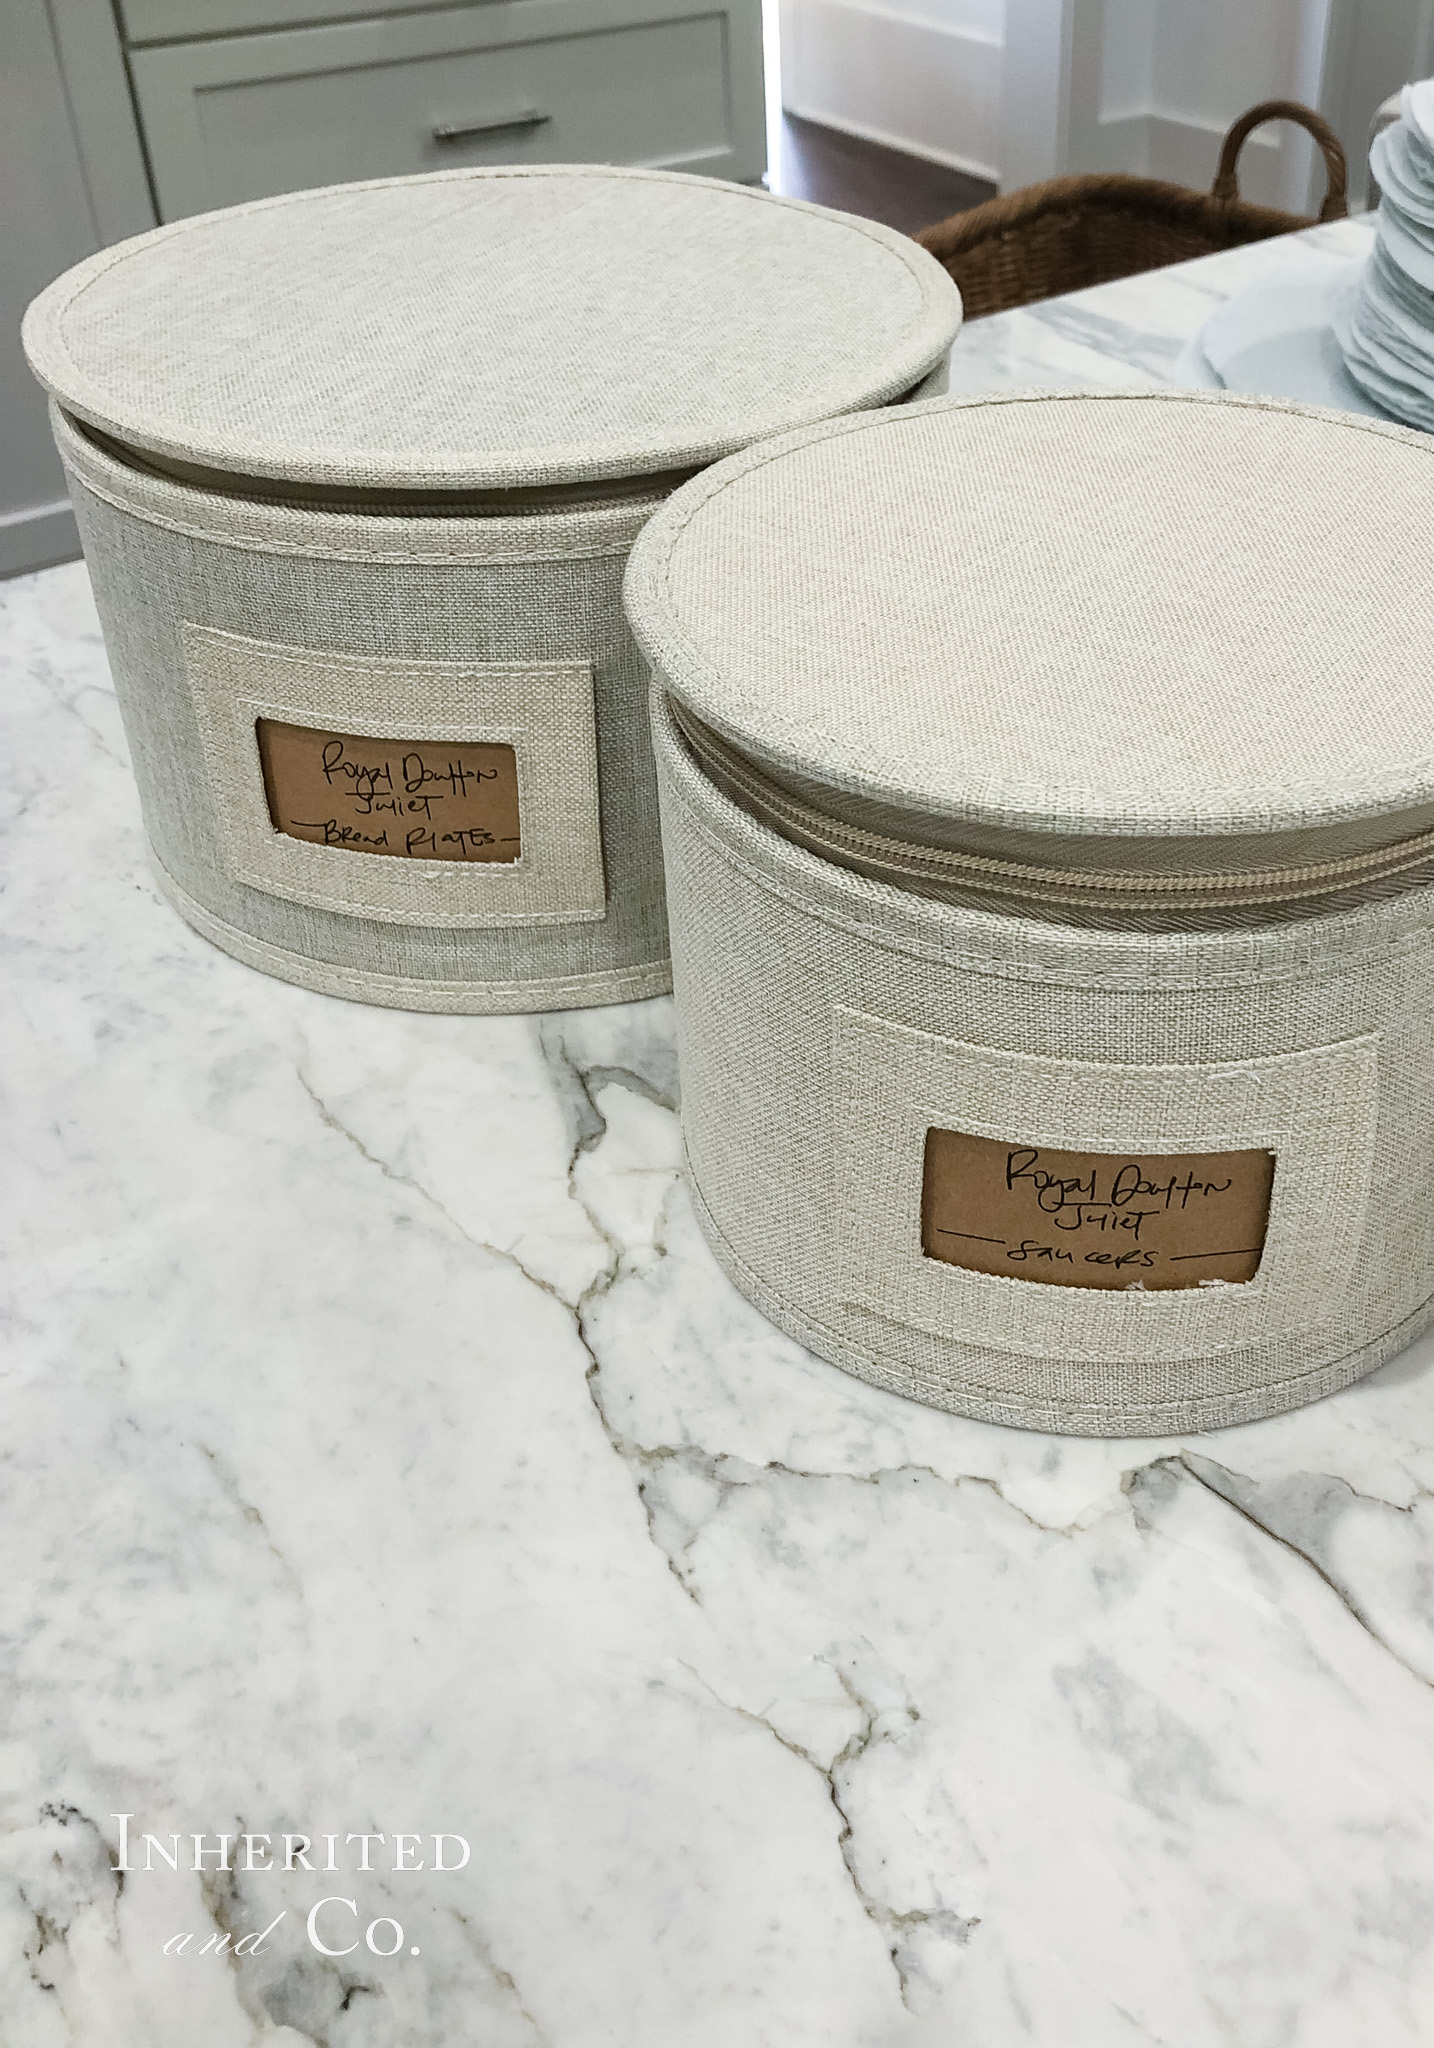 Padded Storage Containers for Fine China